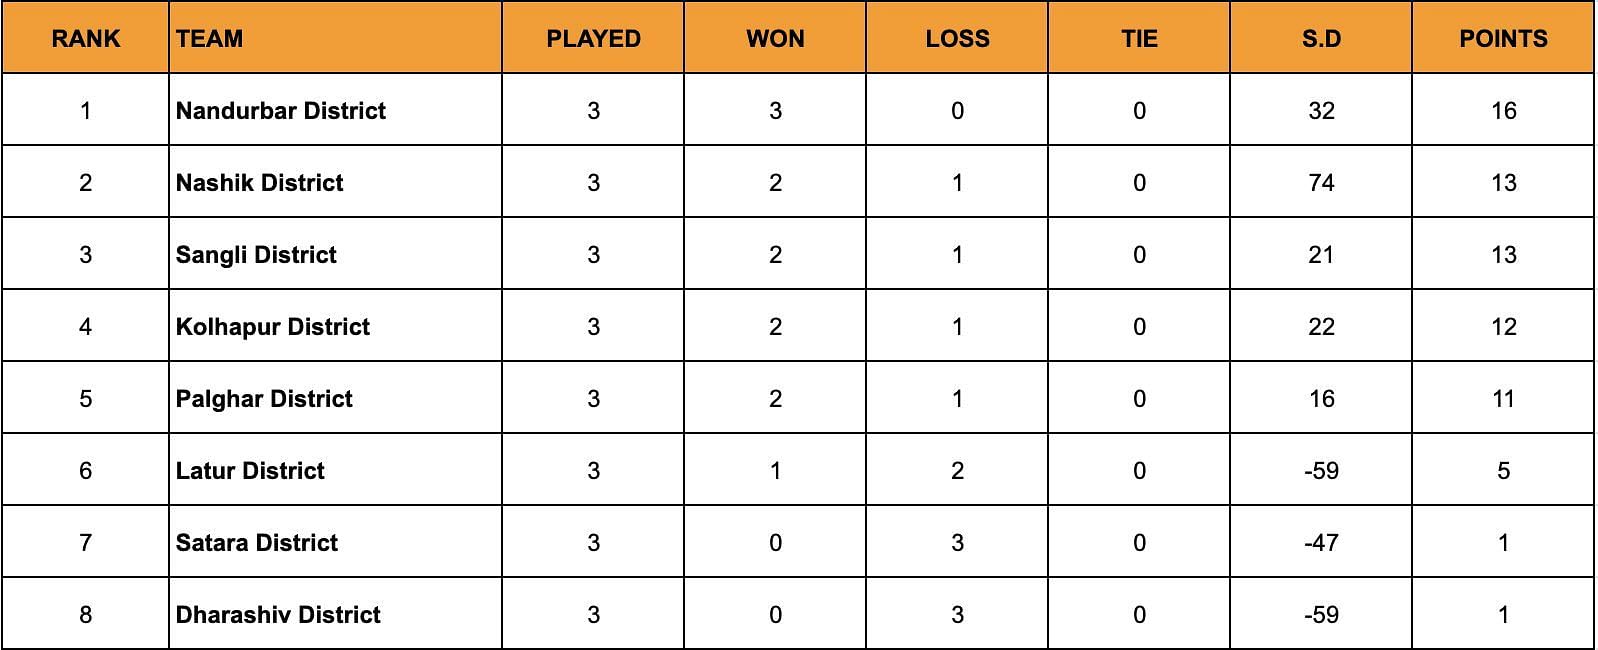 A look at the standings after the conclusion of Day 10.